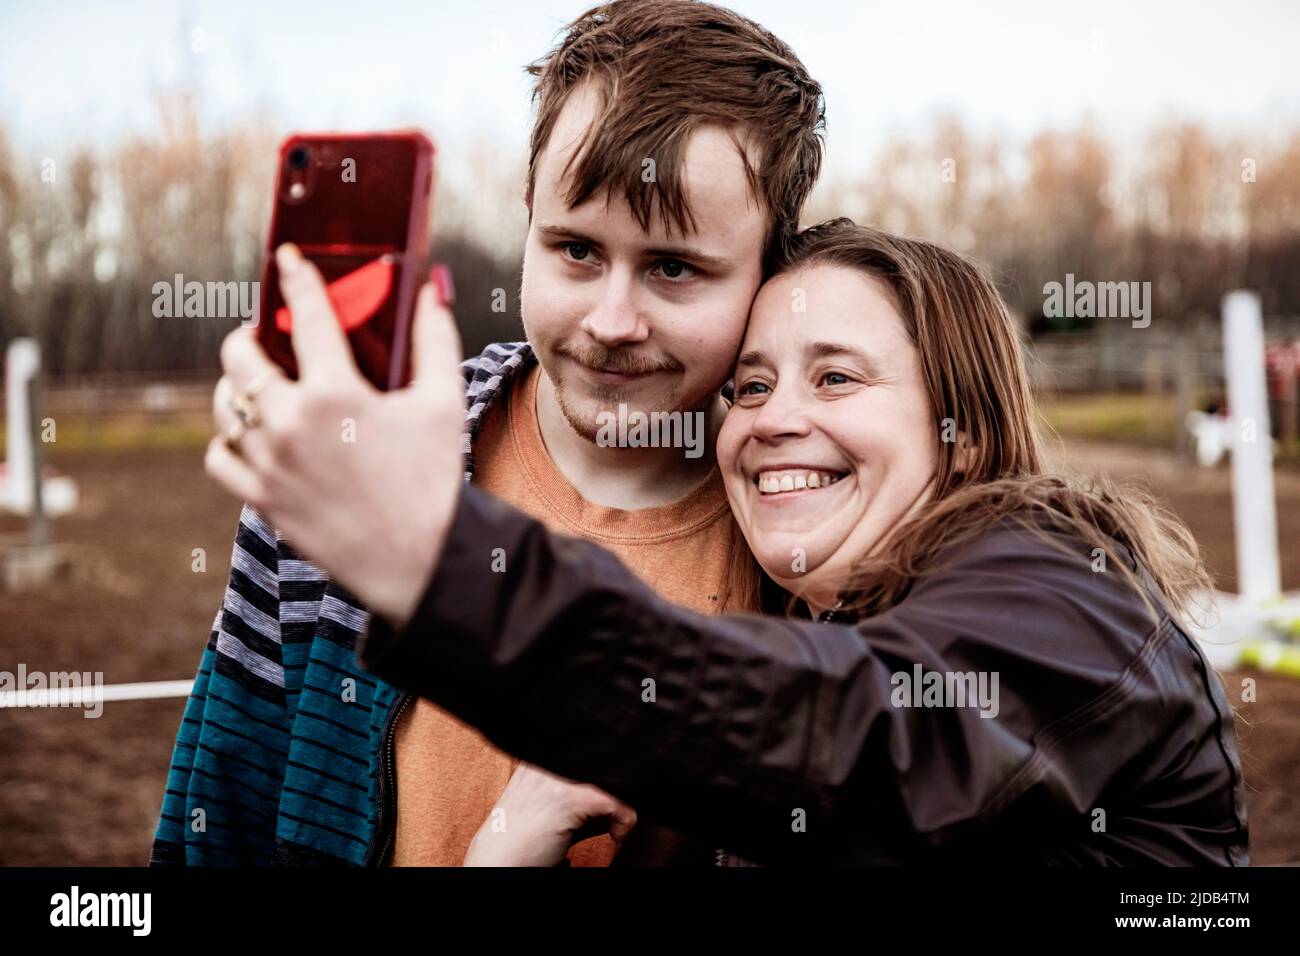 A mom with epilepsy taking a self-portrait with her son who has Aspberger Syndrome at an equine centre; Westlock, Alberta, Canada Stock Photo